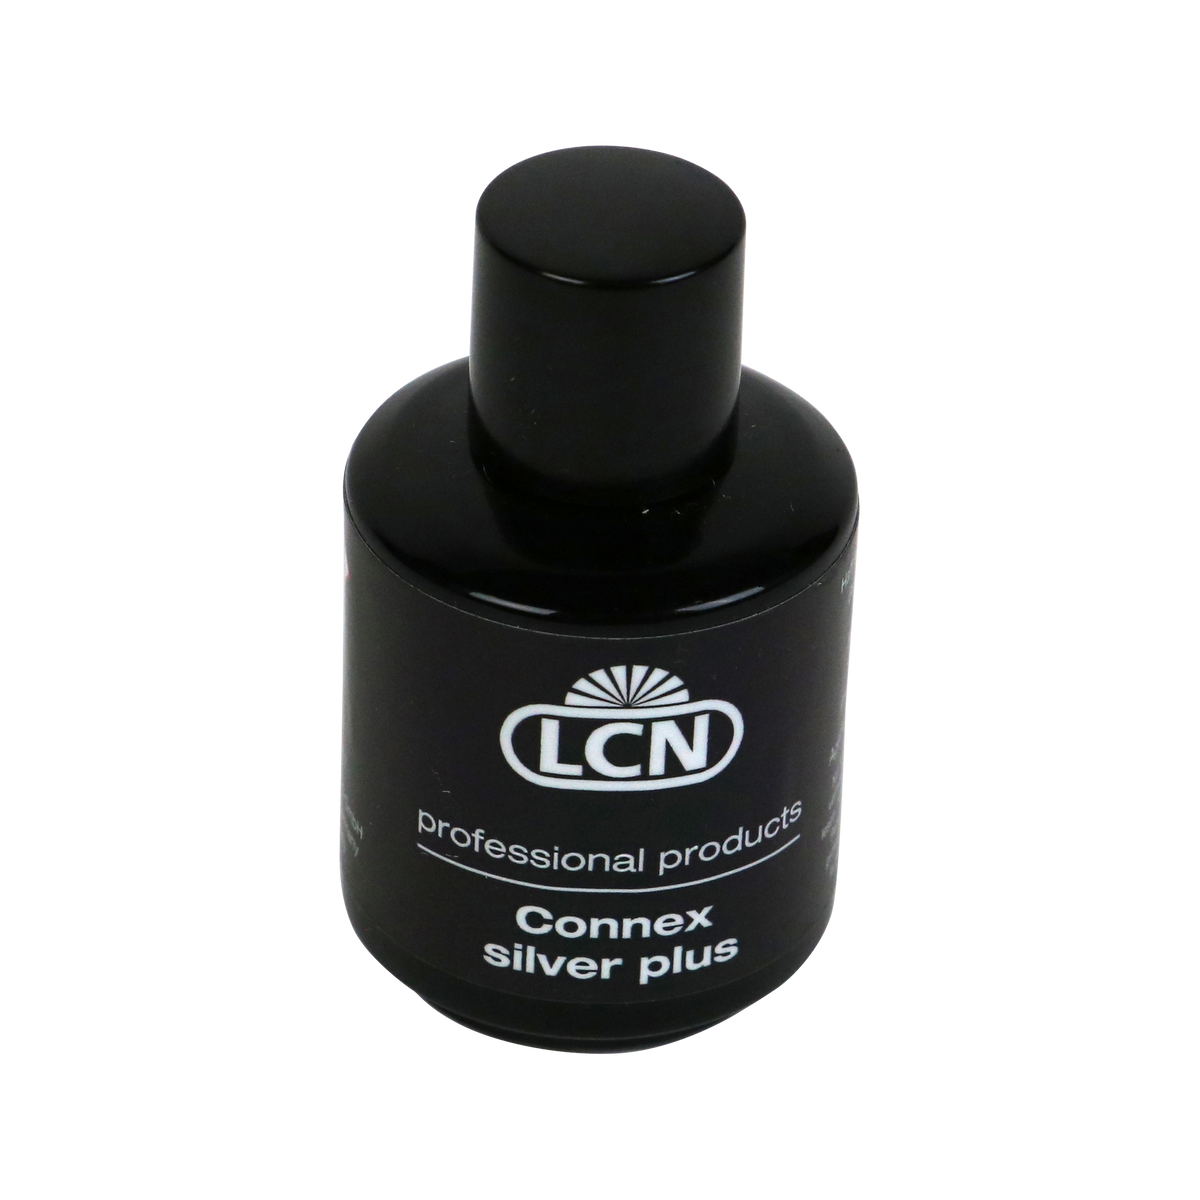 LCN Connex Silver Plus luchtdrogend hechtmiddel 10ml —